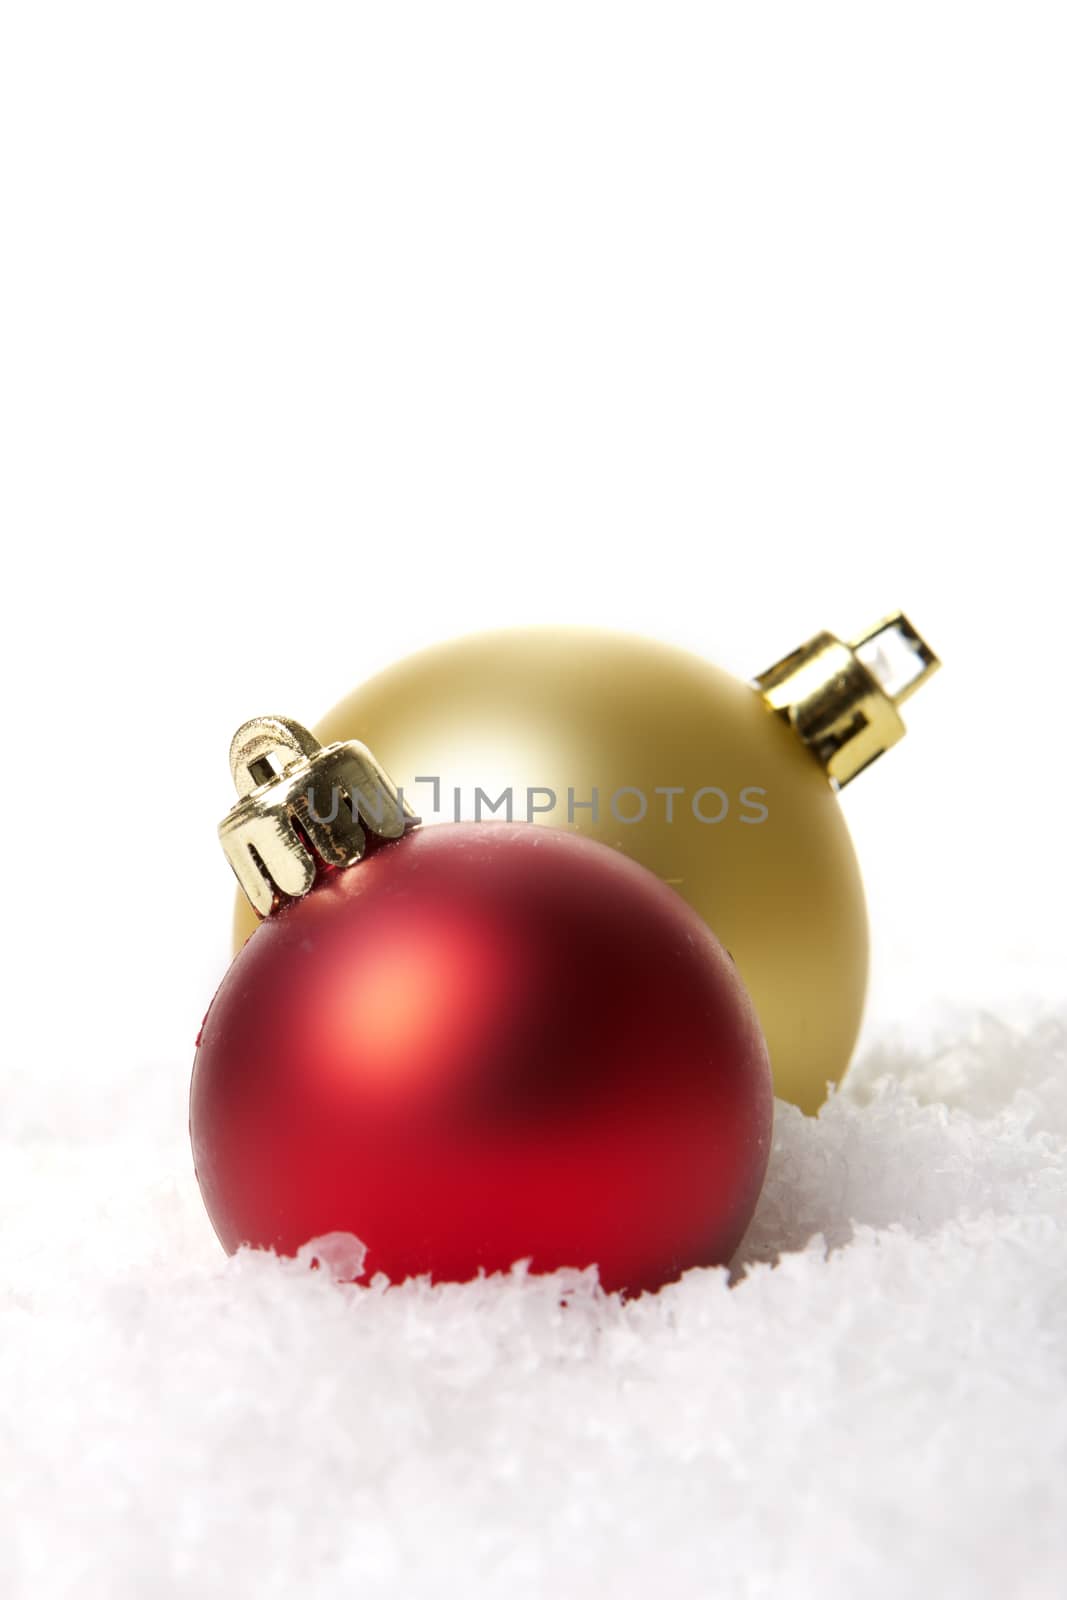 christmas ornament gold and red by Tomjac1980